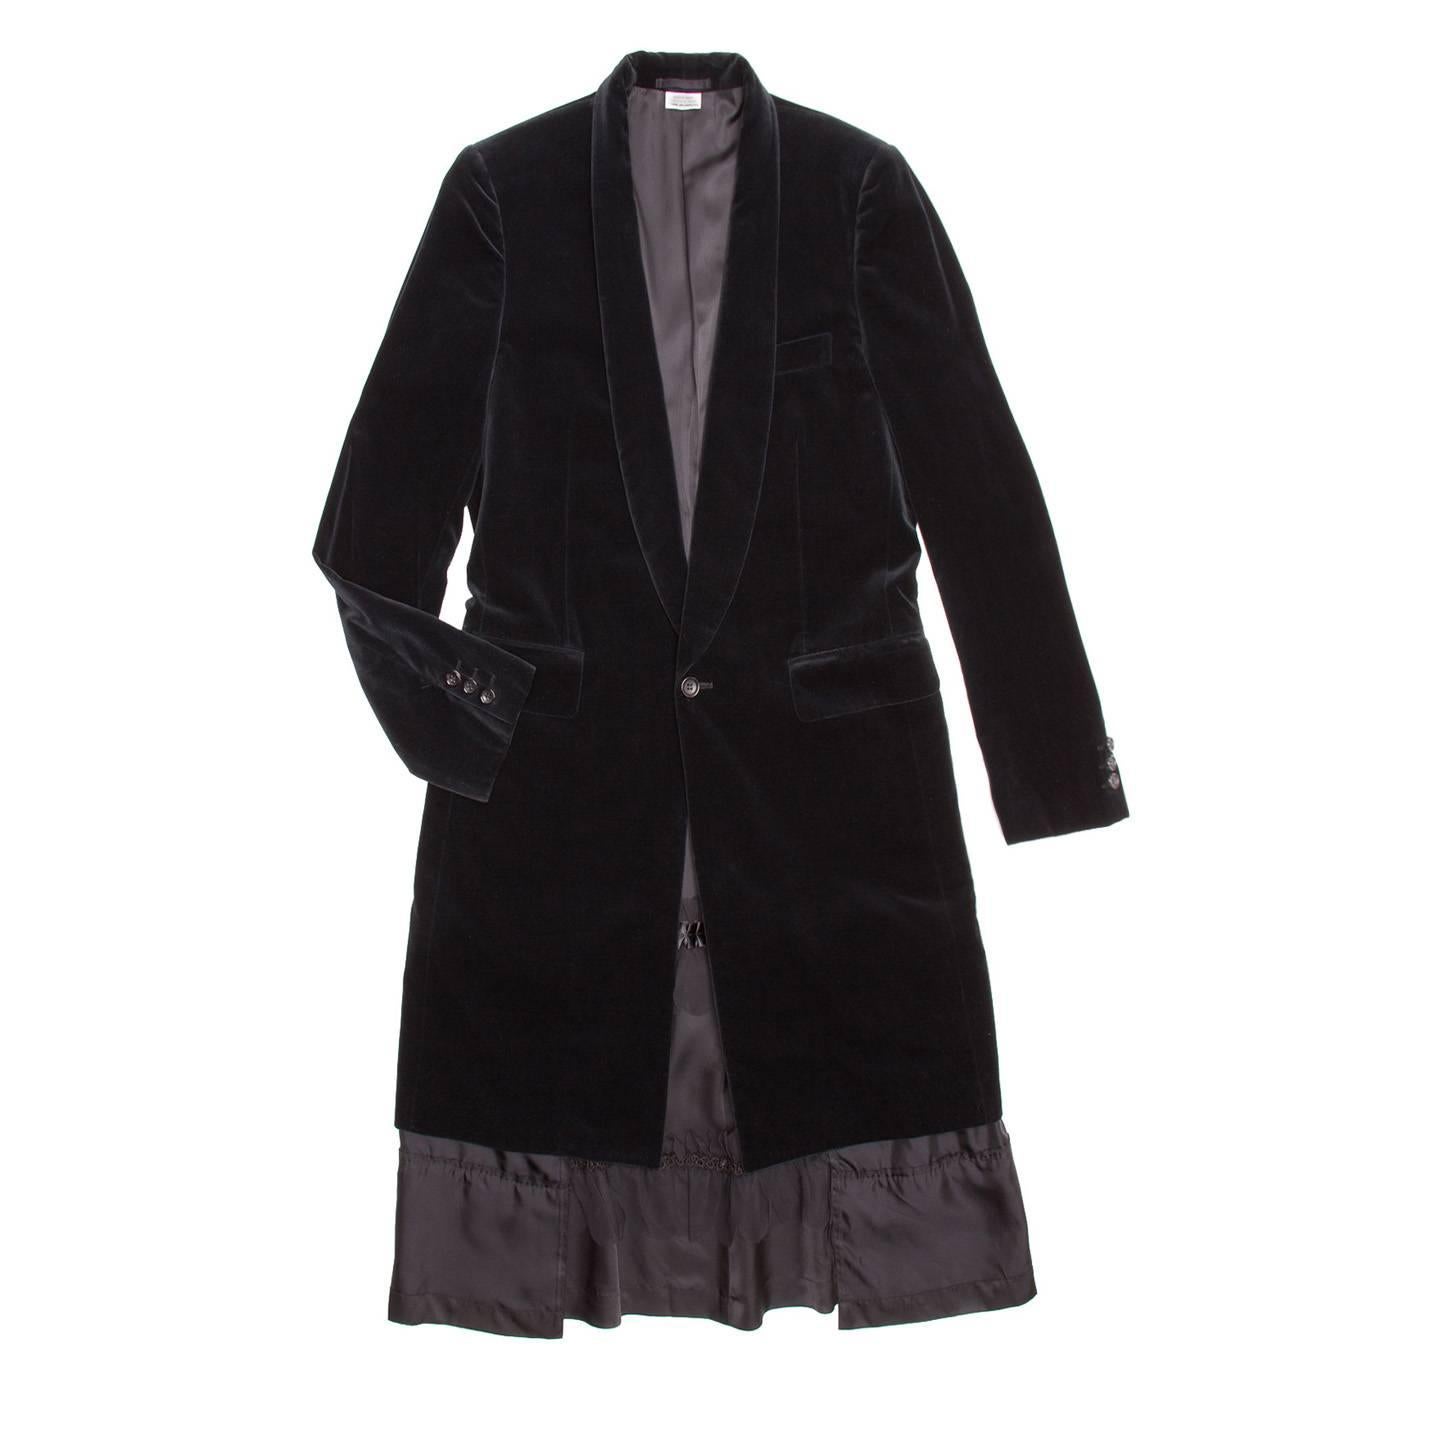 Black long coat with extended lining. Plunging shawl collar with 1 button closures. Front side flap pockets. Lining is a hidden detail of amazing layers that has gathered ruffles with delicate ribbons and pockets which is a beautiful surprise hiding